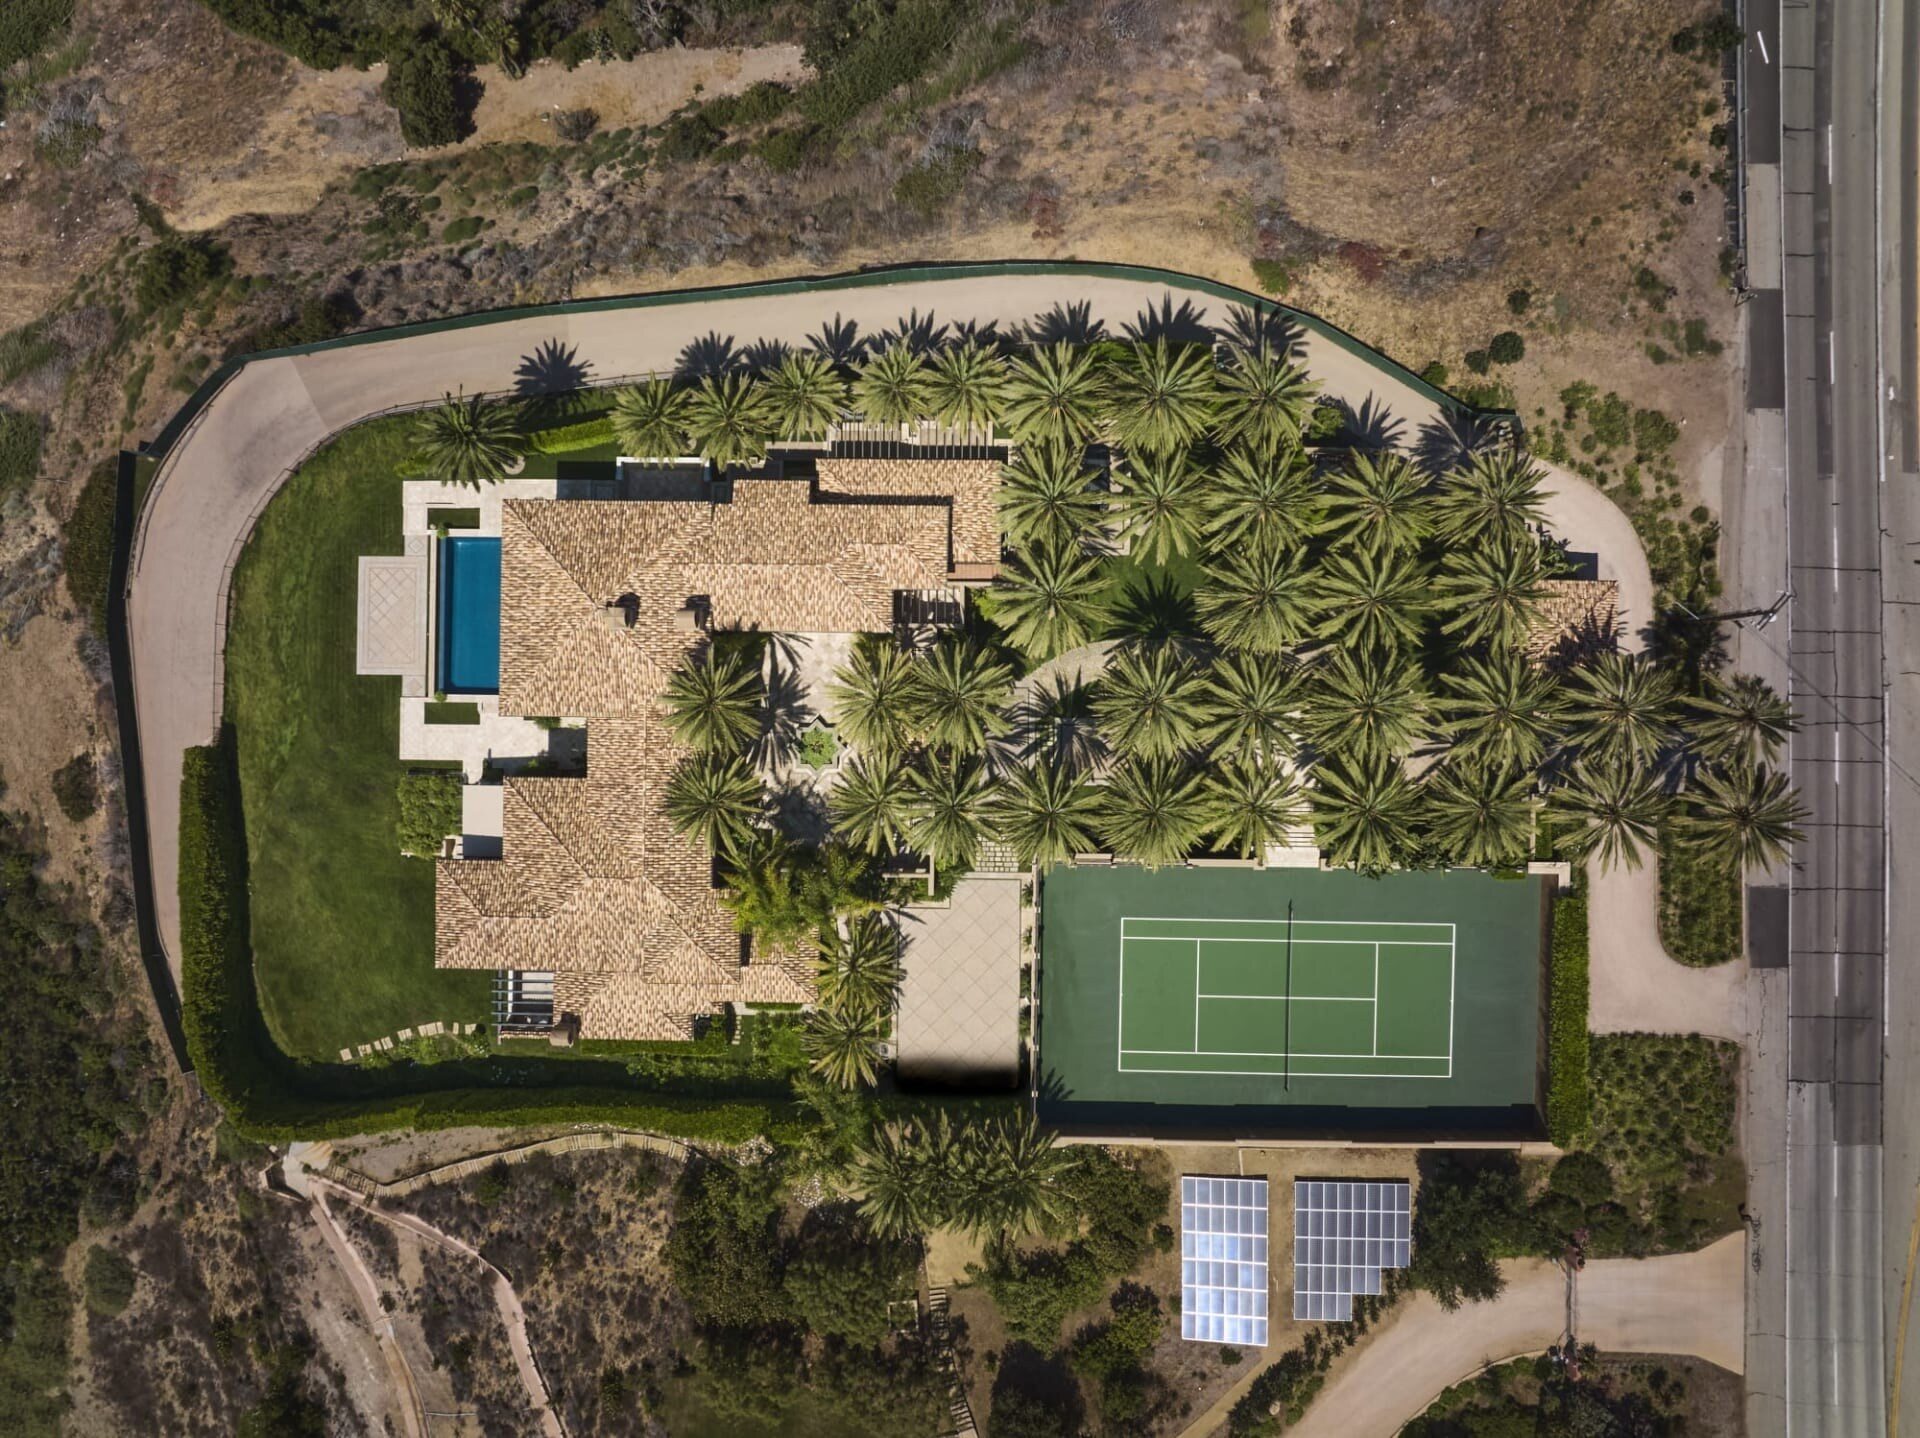 This is what Cher's unique house in Malibu looks like.  For $75 million you can live like her